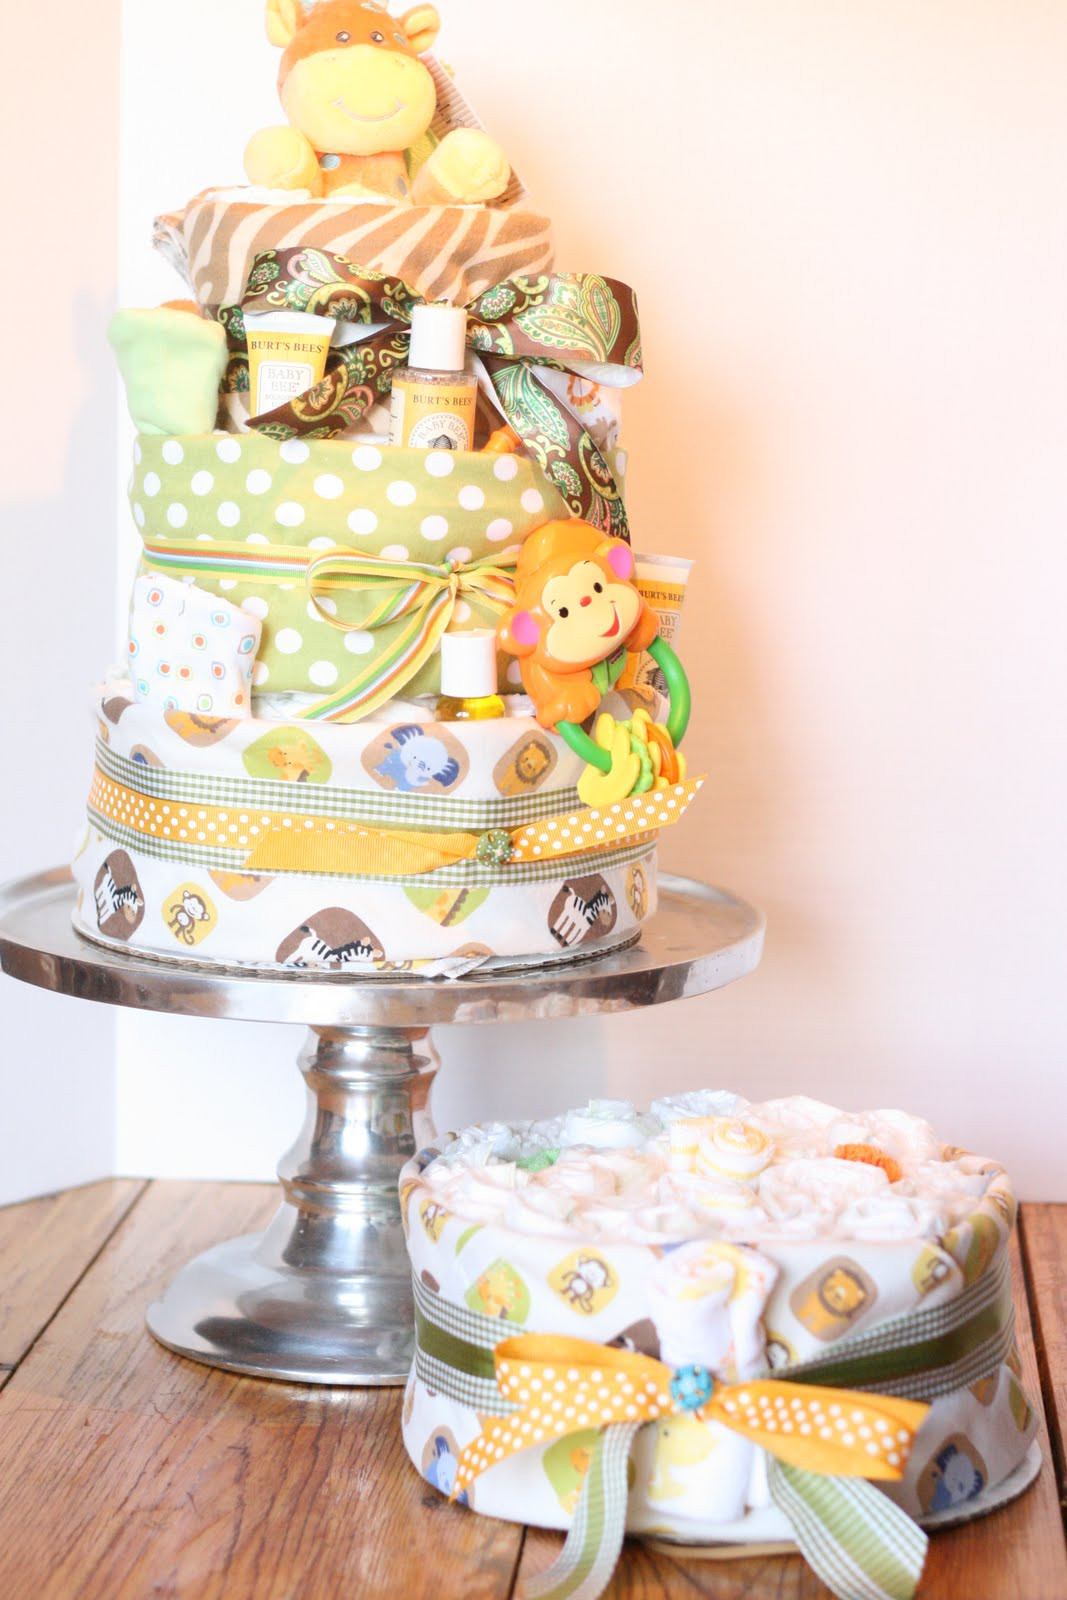 DIY Baby Shower Diaper Cake
 A Little Junk In My Trunk How to Make a Diaper Cake